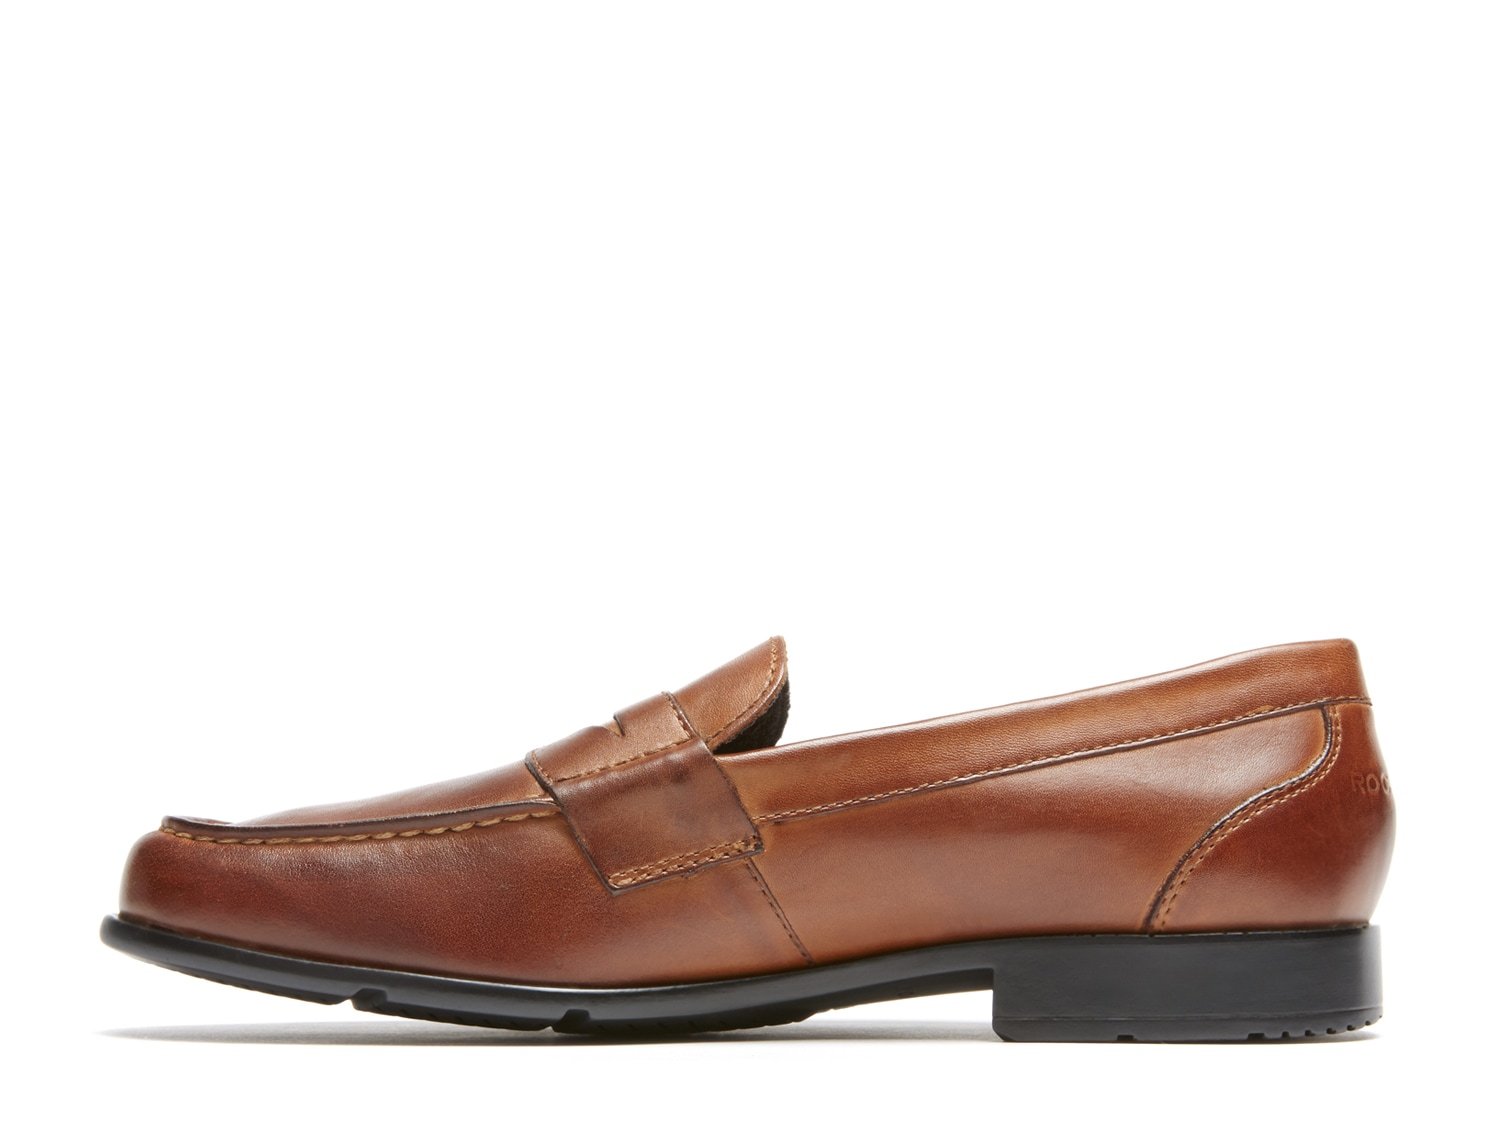 Rockport Classic Penny Loafer | DSW